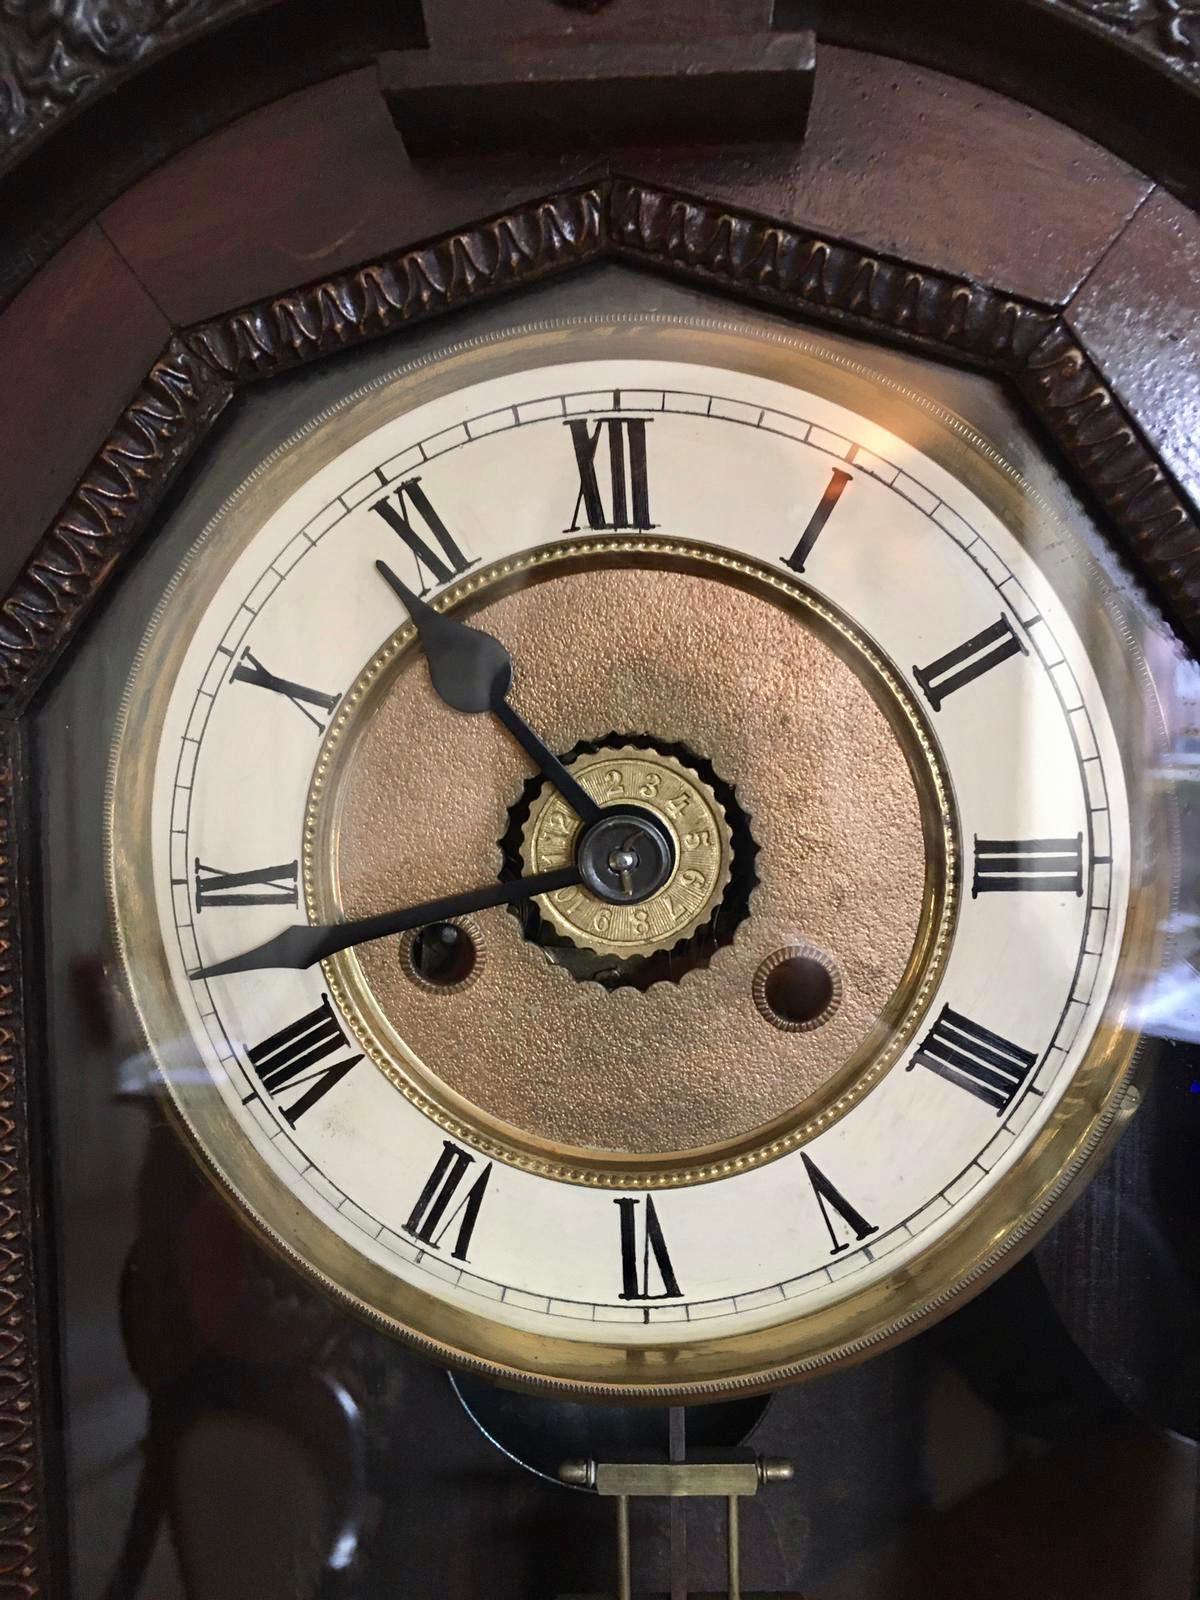 Antique 19th century Victorian carved ornate mantel clock with an 8 day striking movement, original hands and unusual pendulum. The case having seven turned finials, turned column supports standing on a carved plinth base. In good working order with